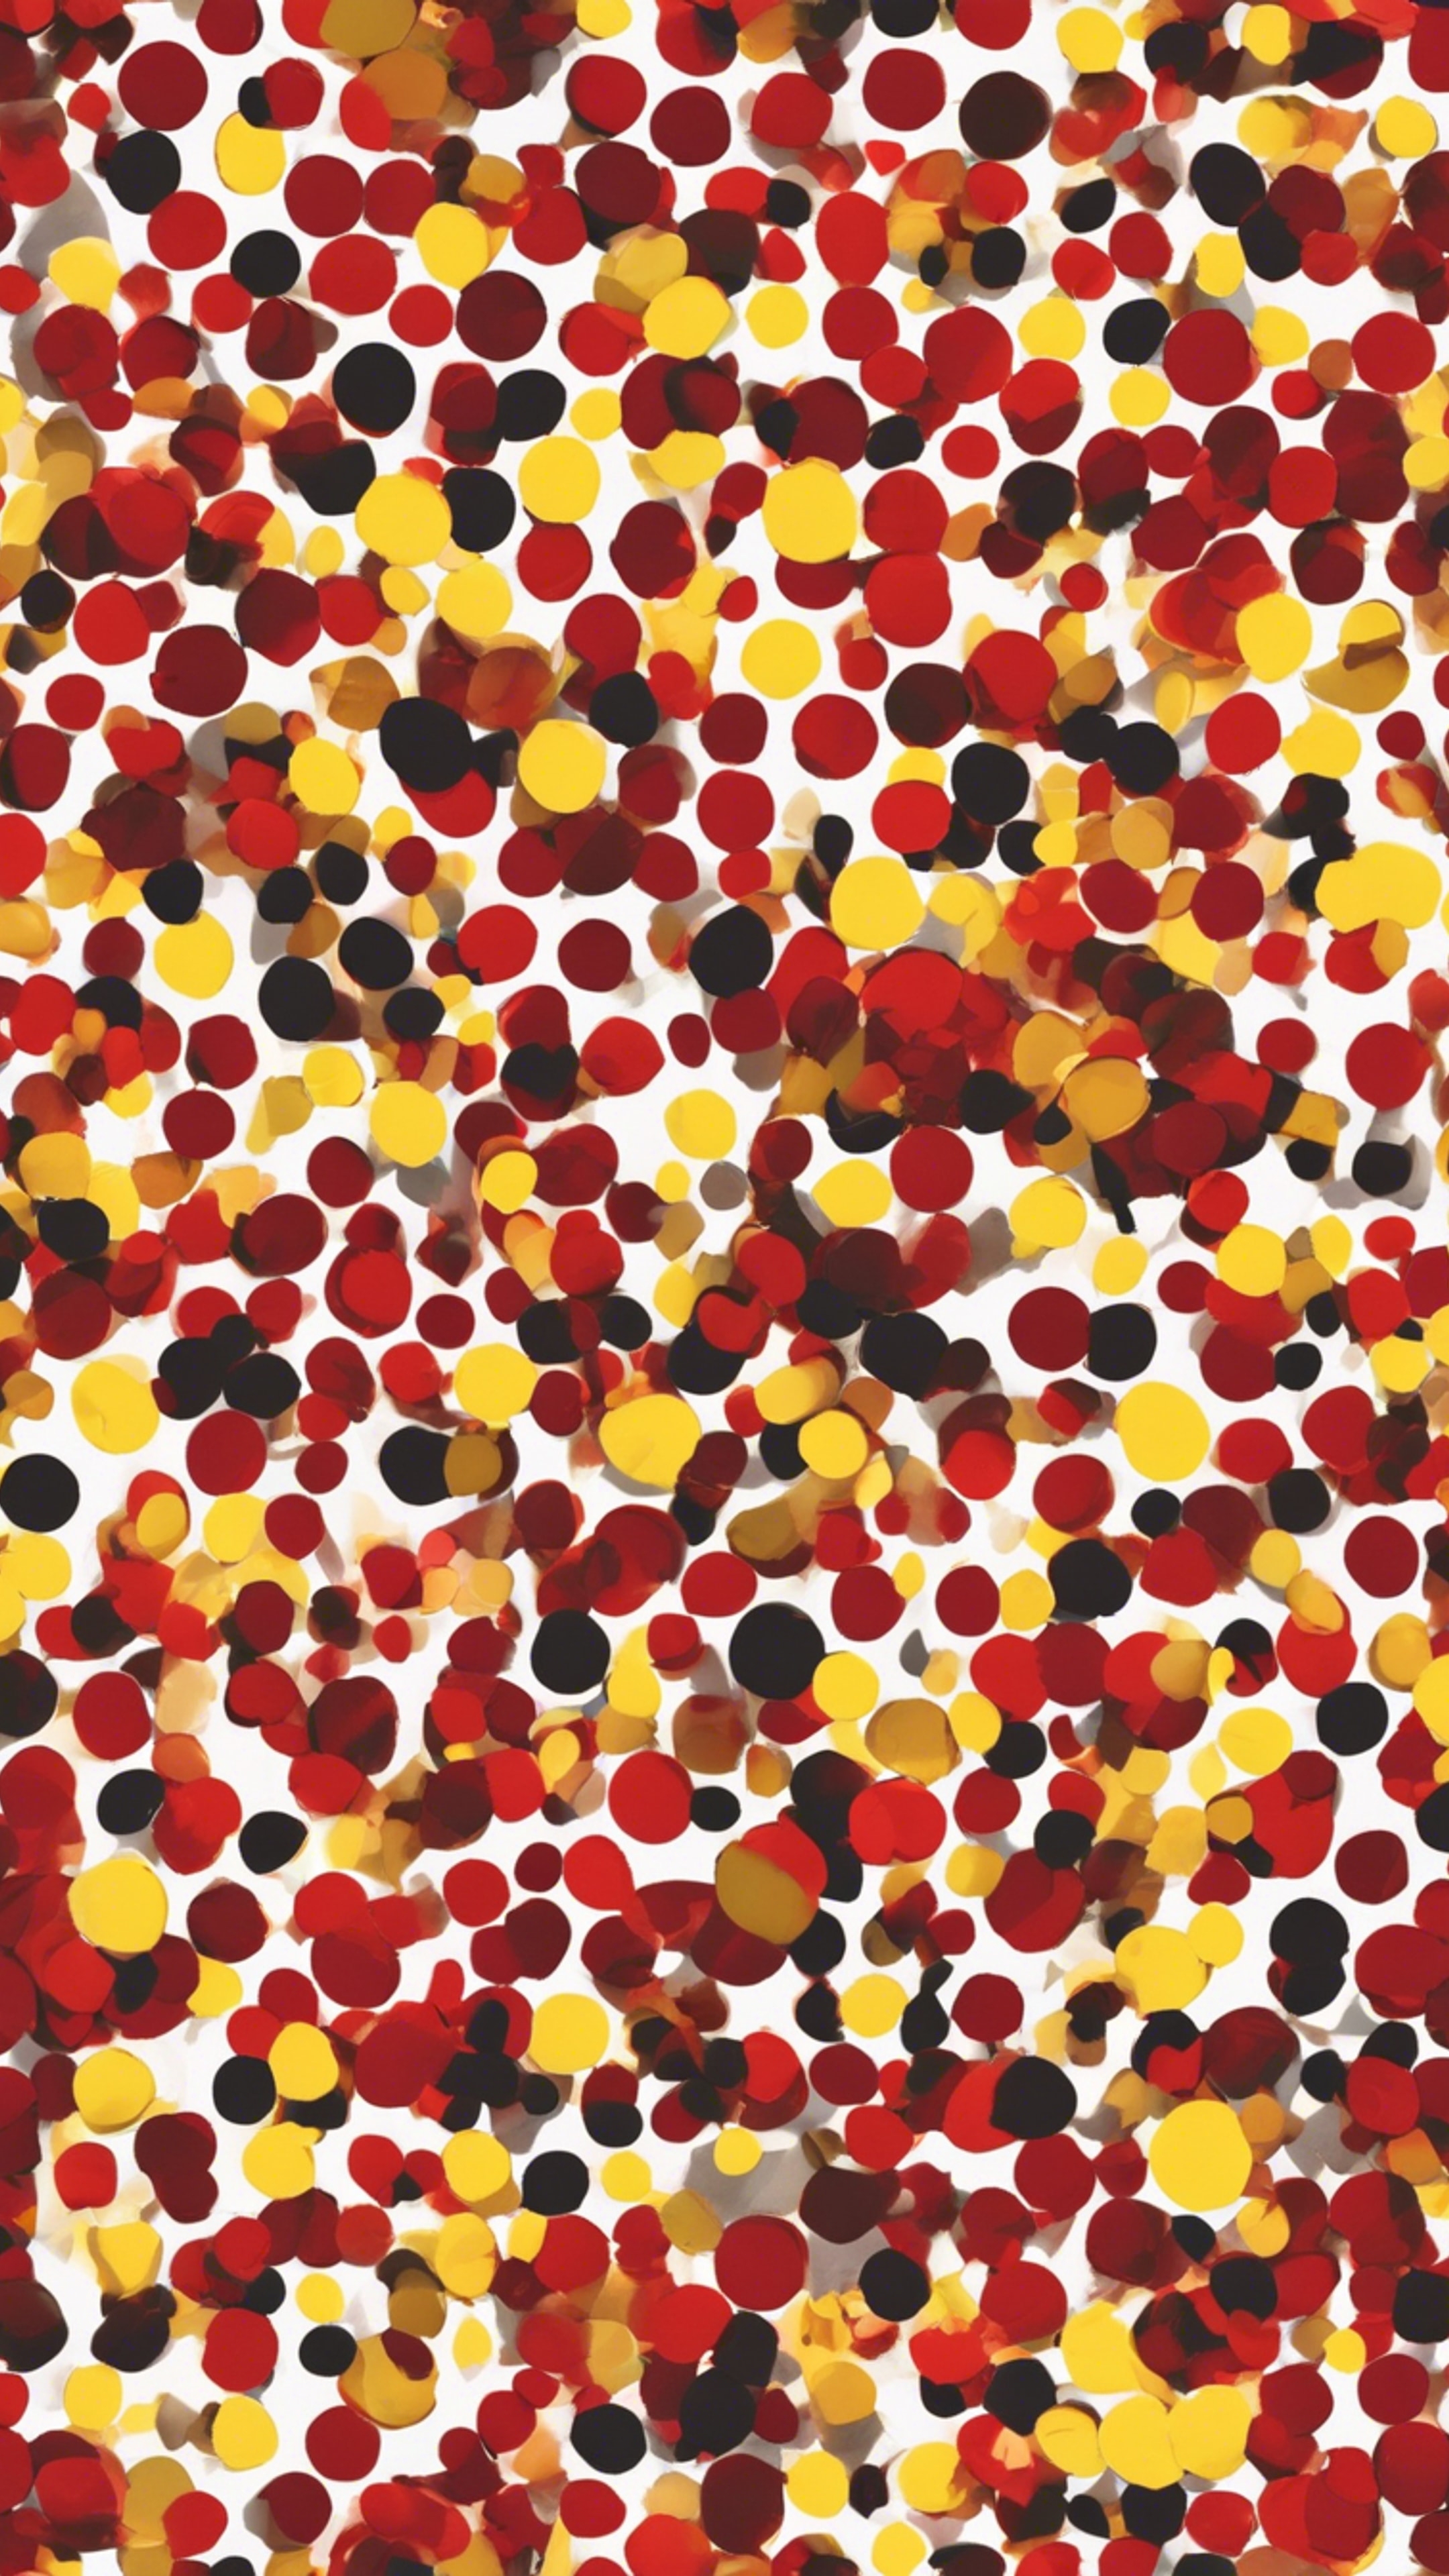 Scattered polka dots, small red ones and large yellow ones, in a seamless pattern. Kertas dinding[491989b84cbb438494fe]